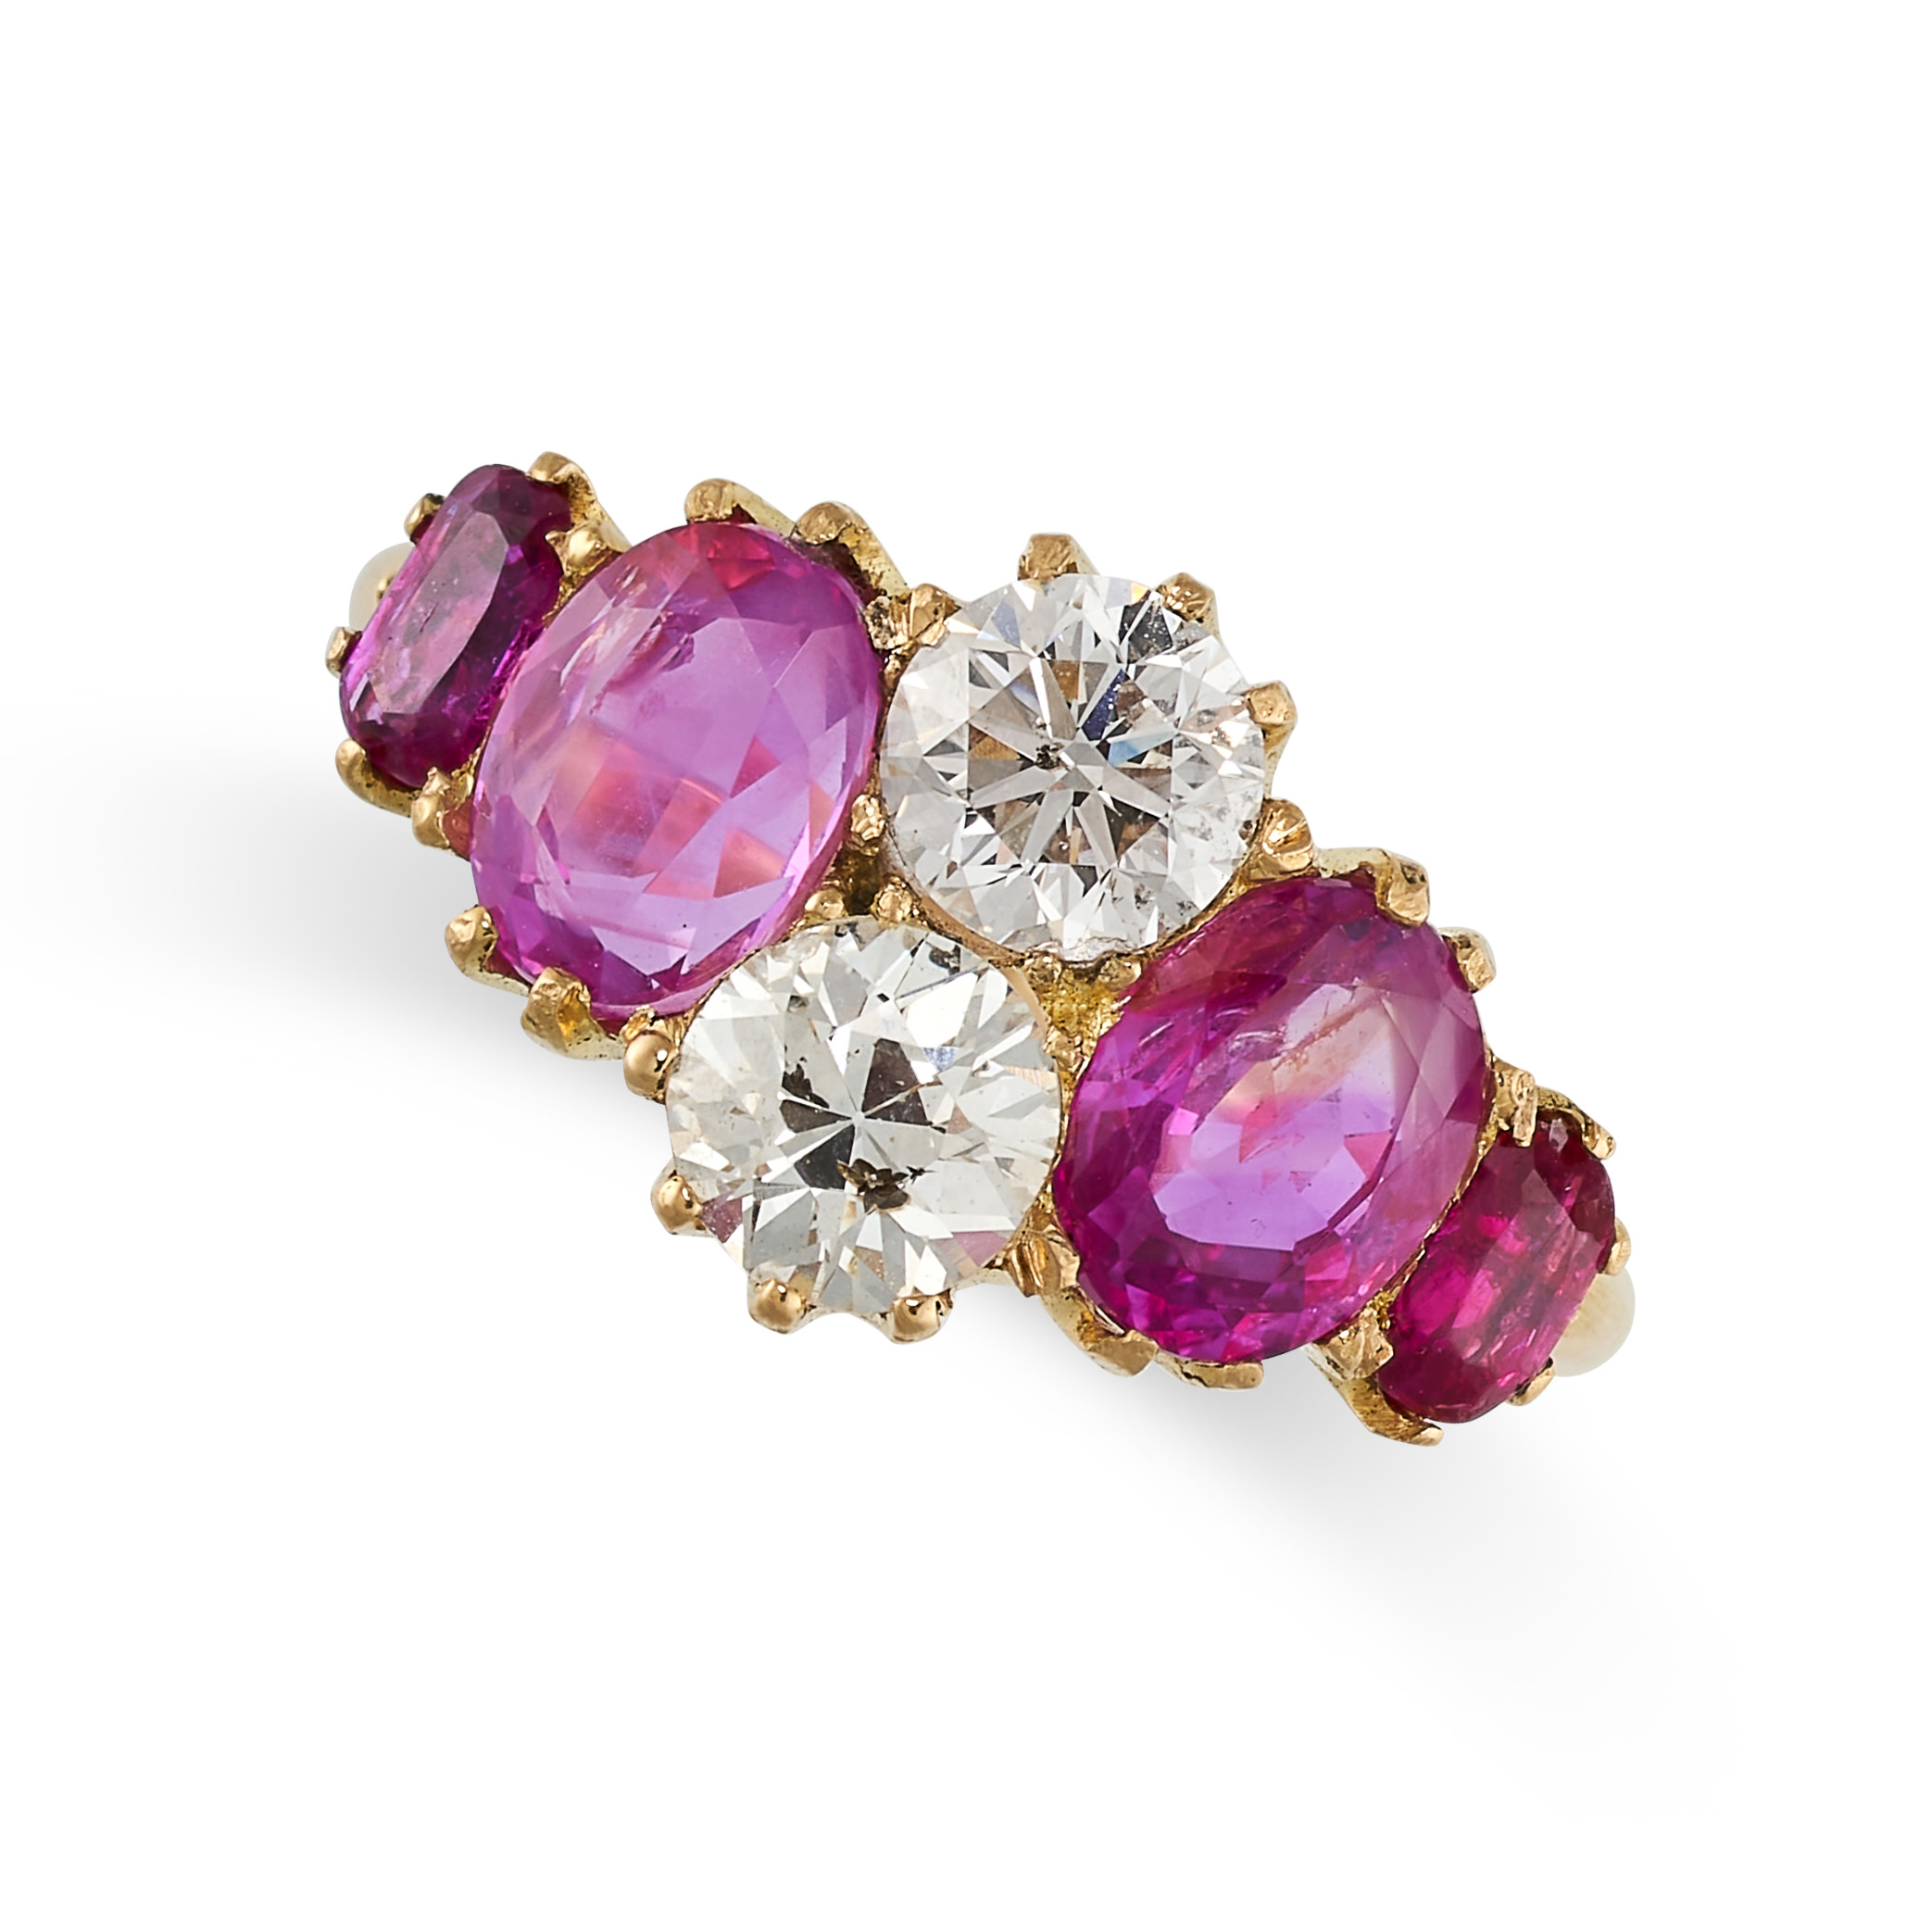 A BURMA NO HEAT RUBY, PINK SAPPHIRE AND DIAMOND RING in yellow gold, set with three graduated